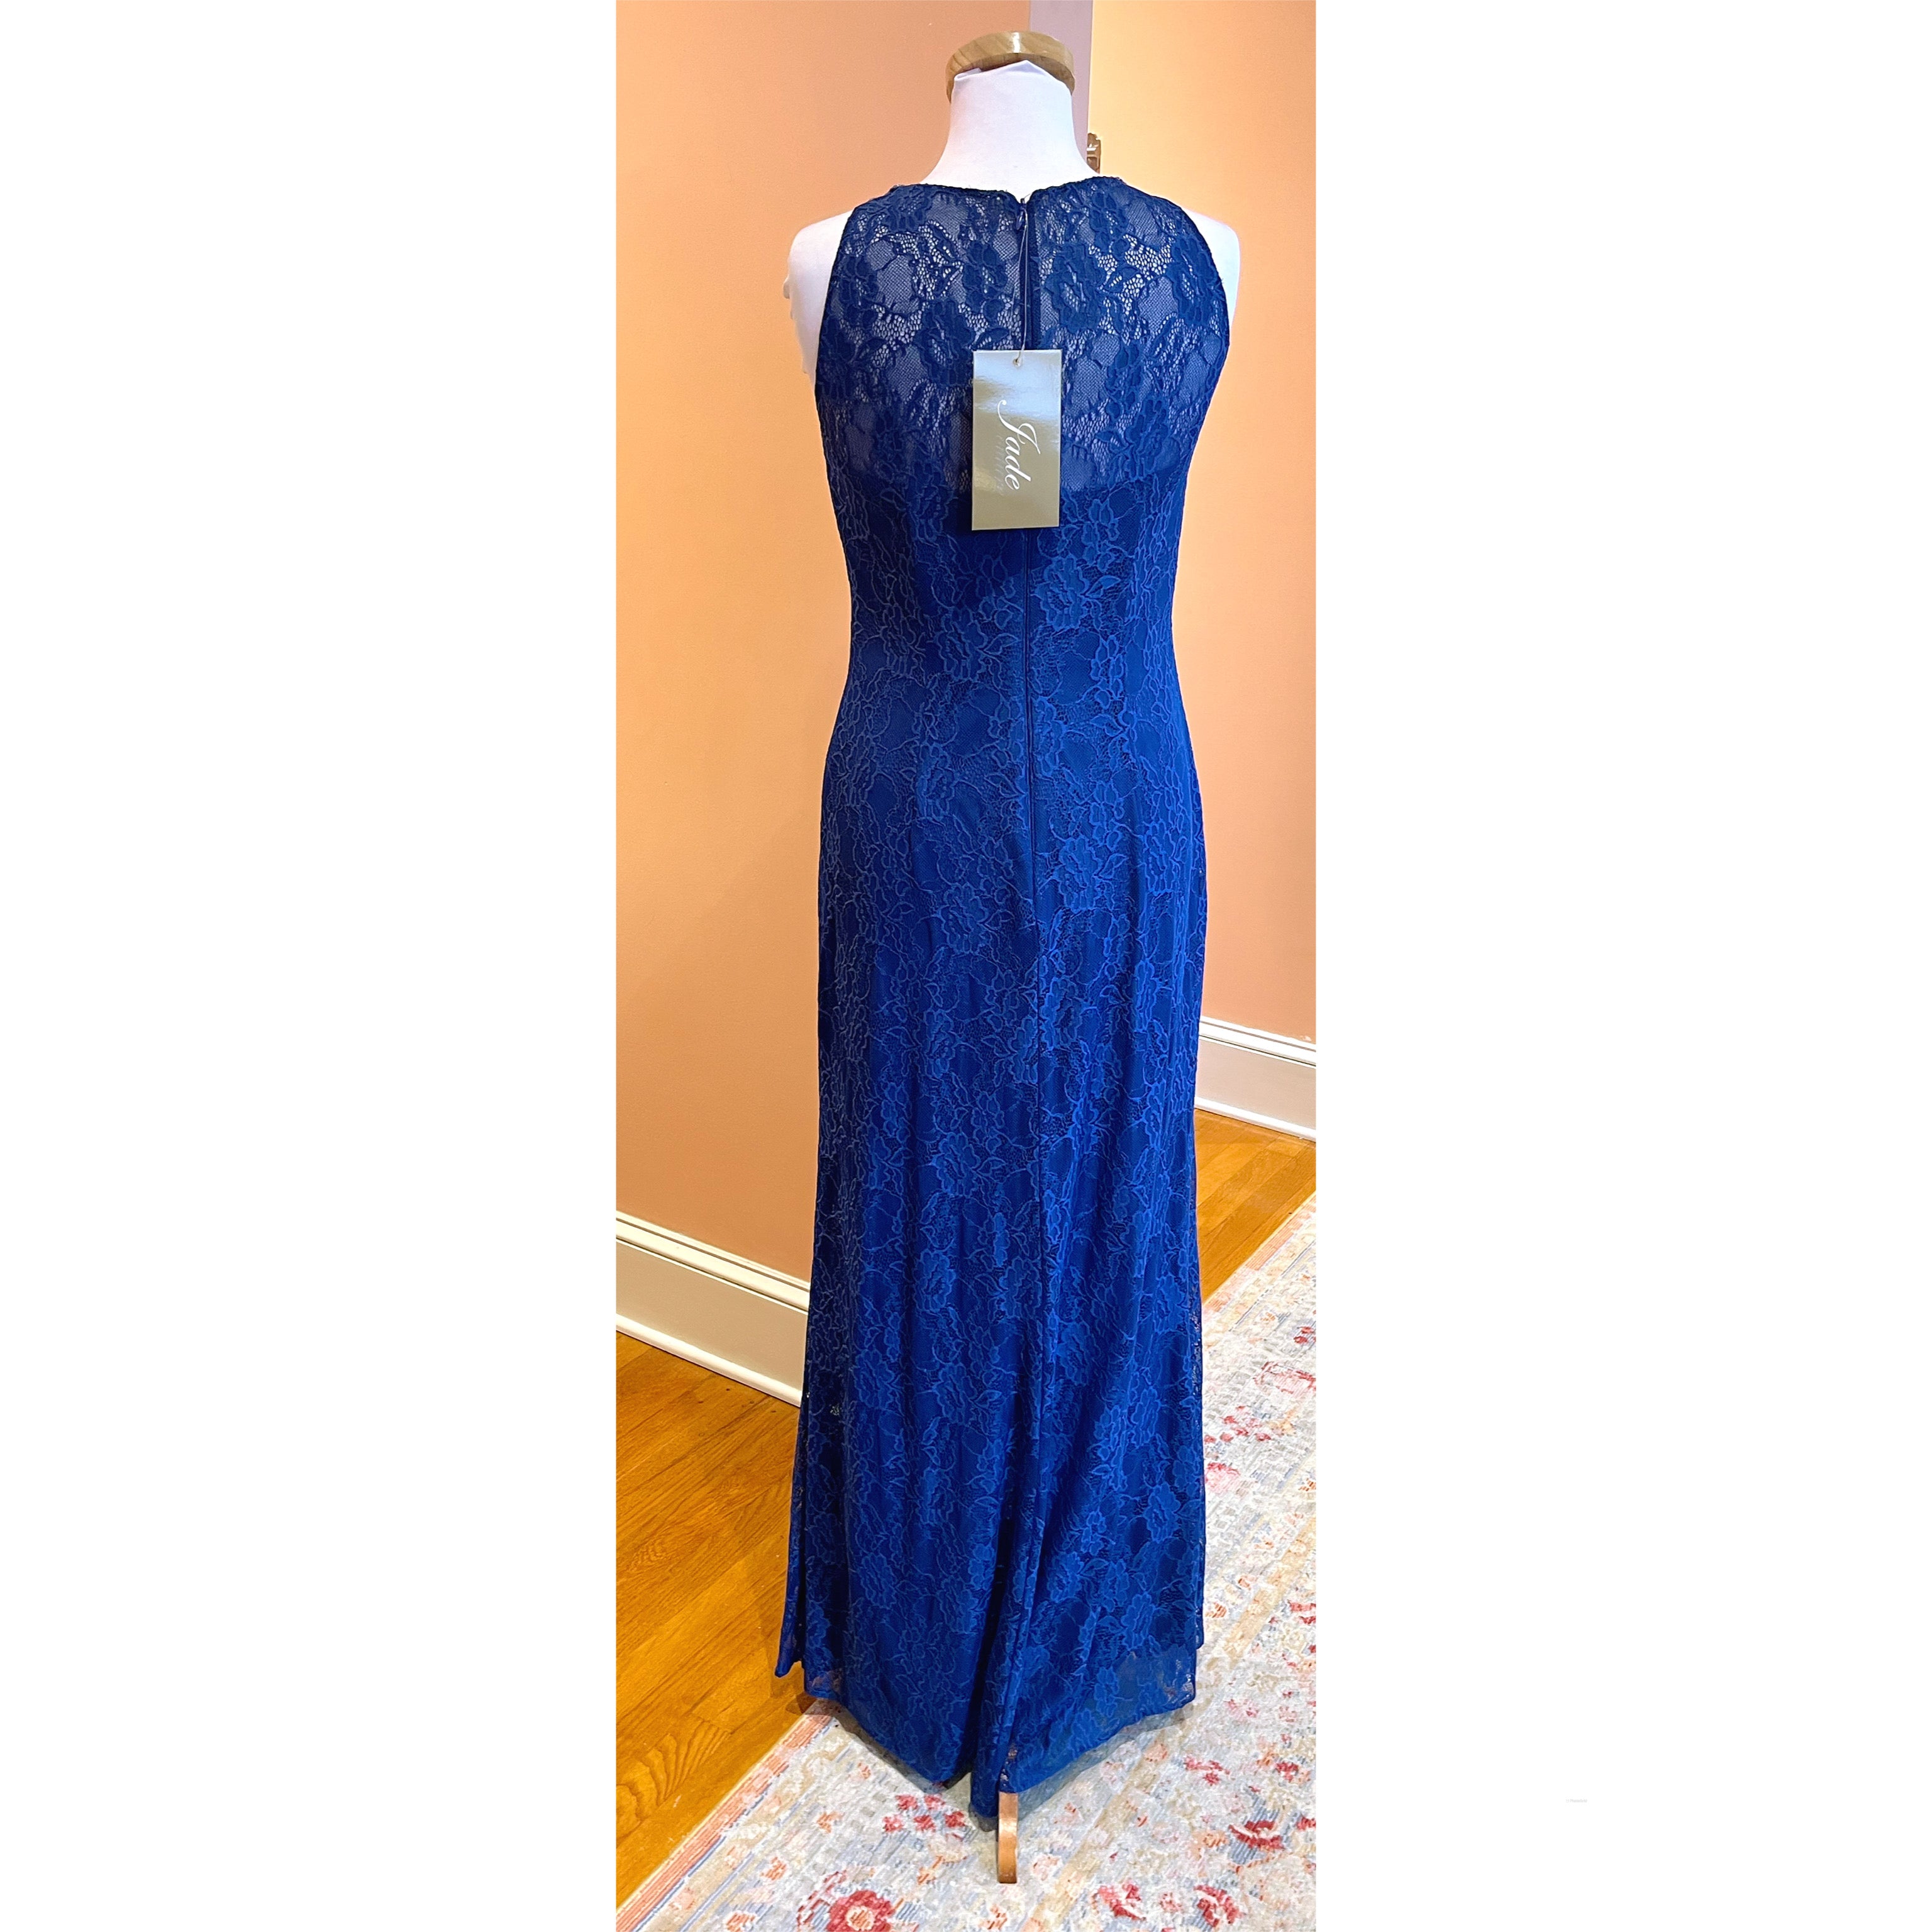 Jade Couture cobalt blue dress, size 4, NEW WITH TAGS!